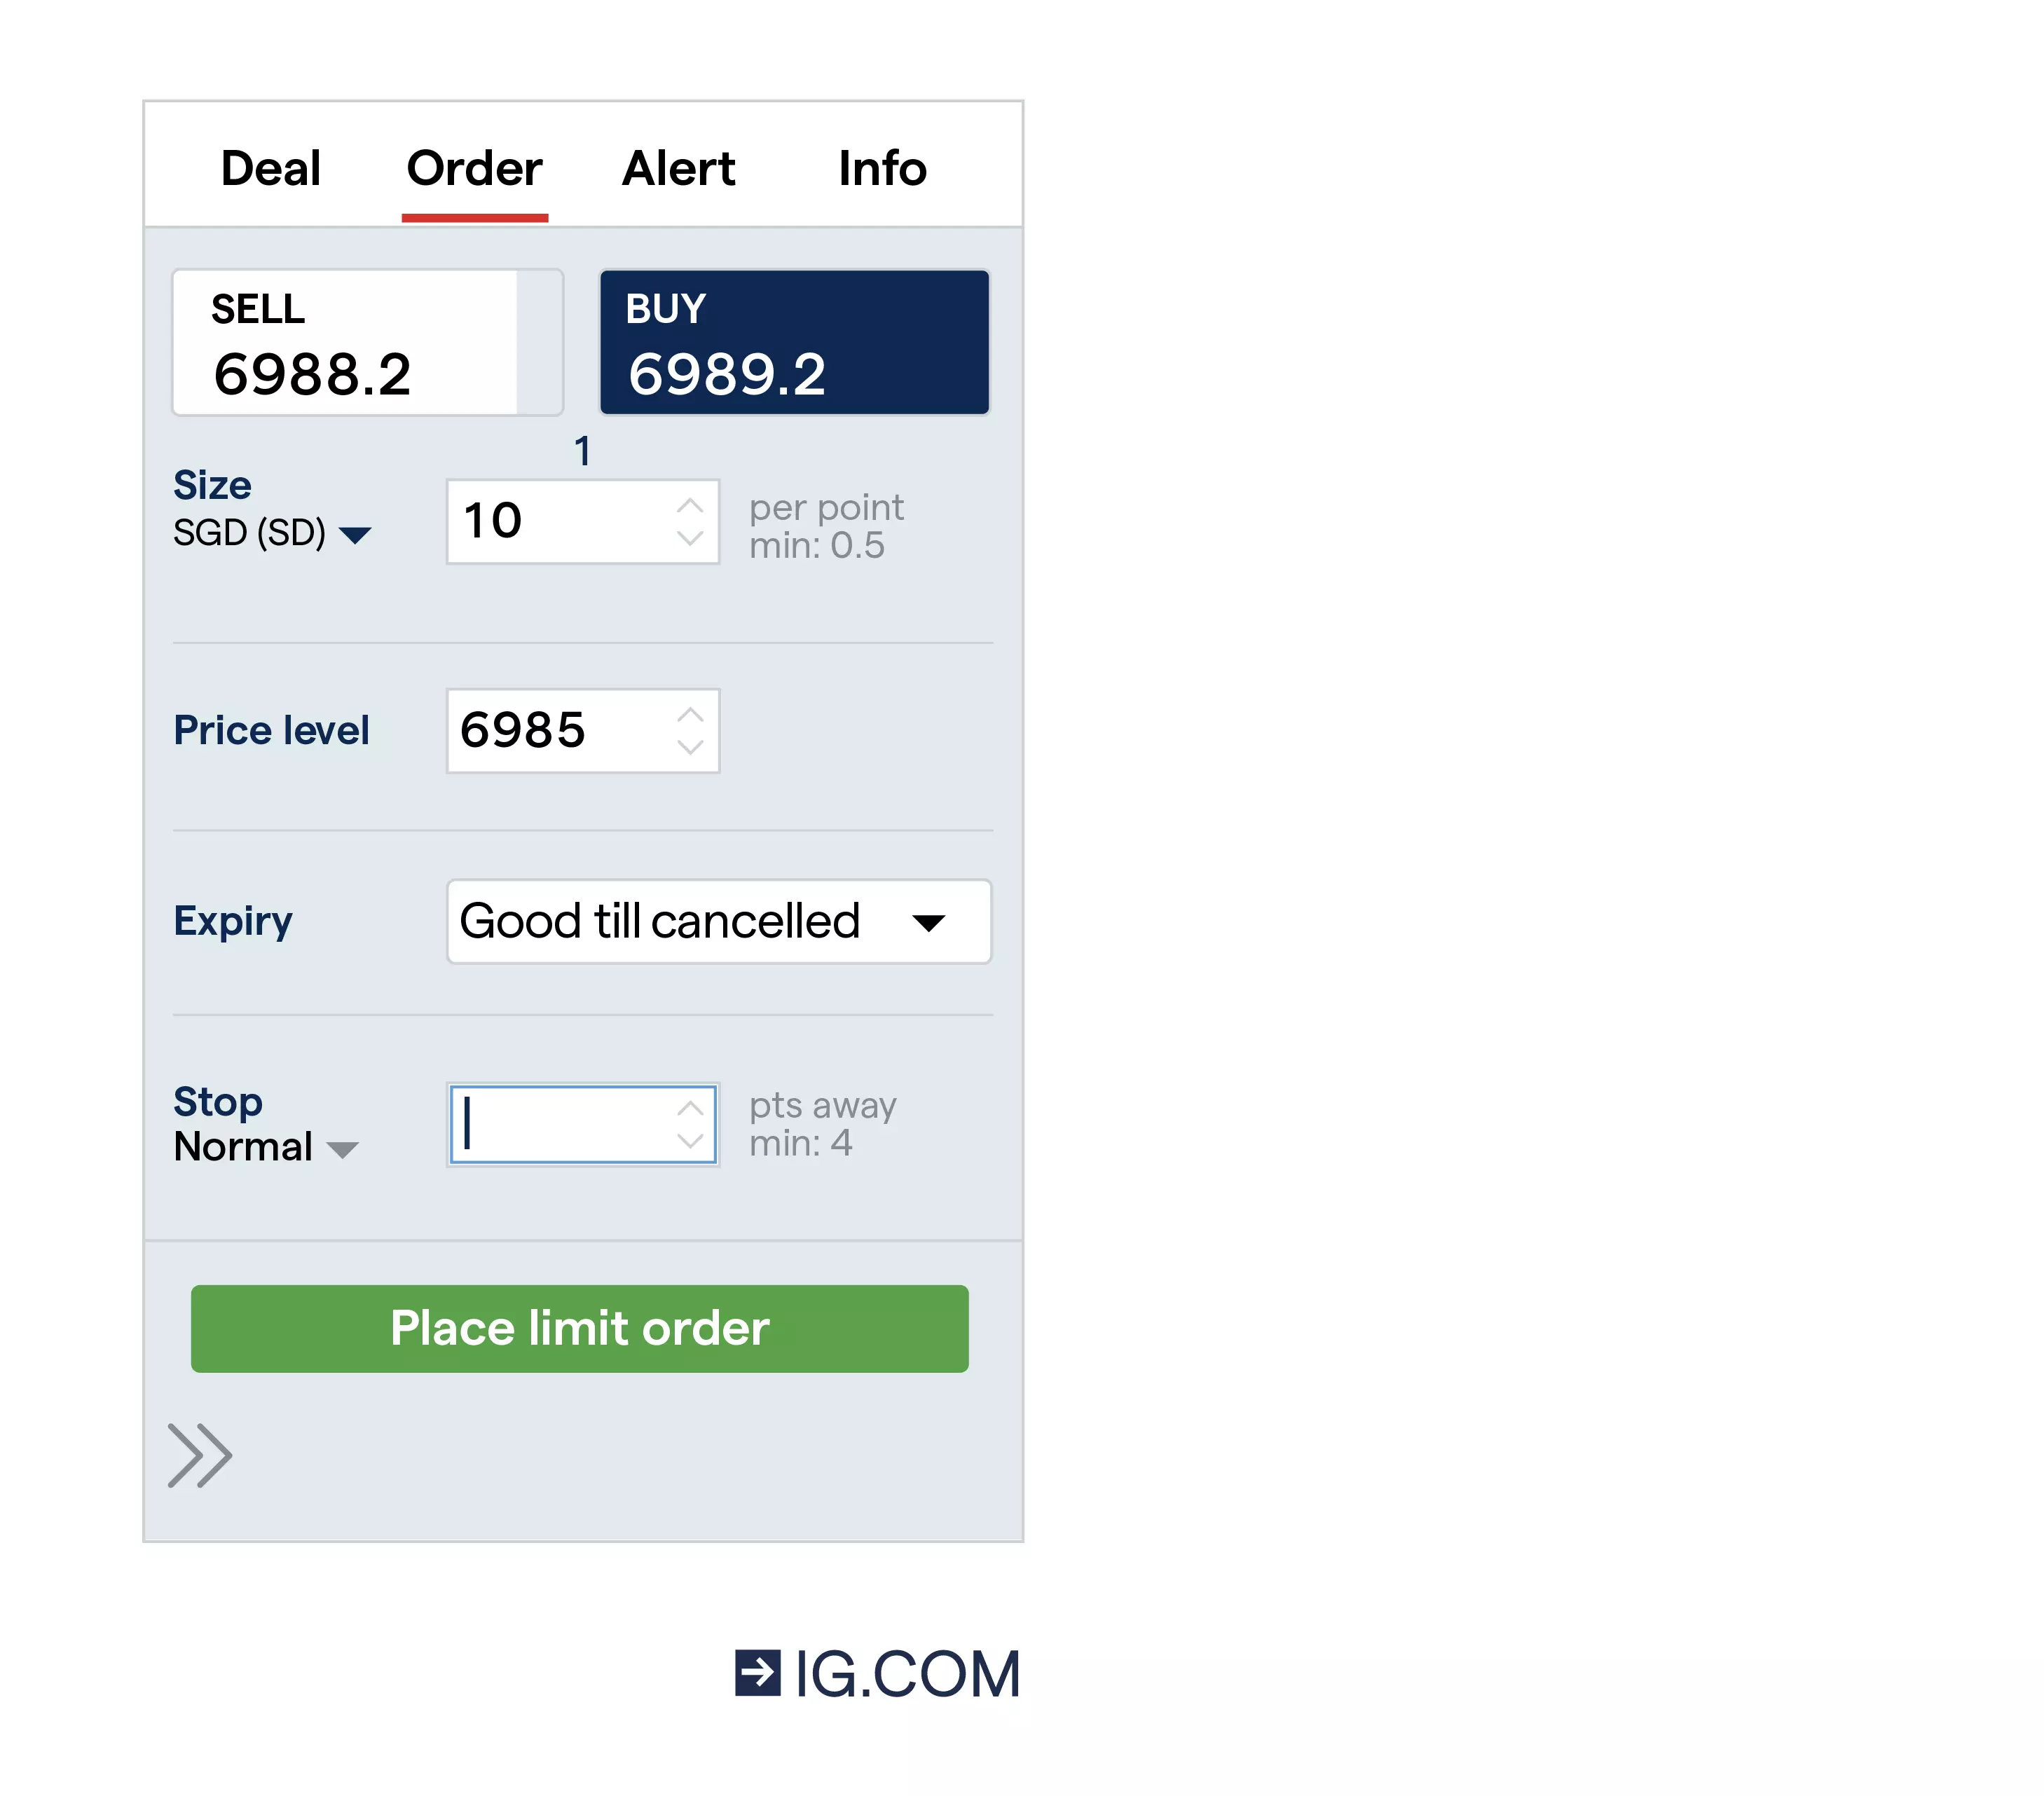 The deal ticket on our share trading account showing the types of orders our customers can choose from